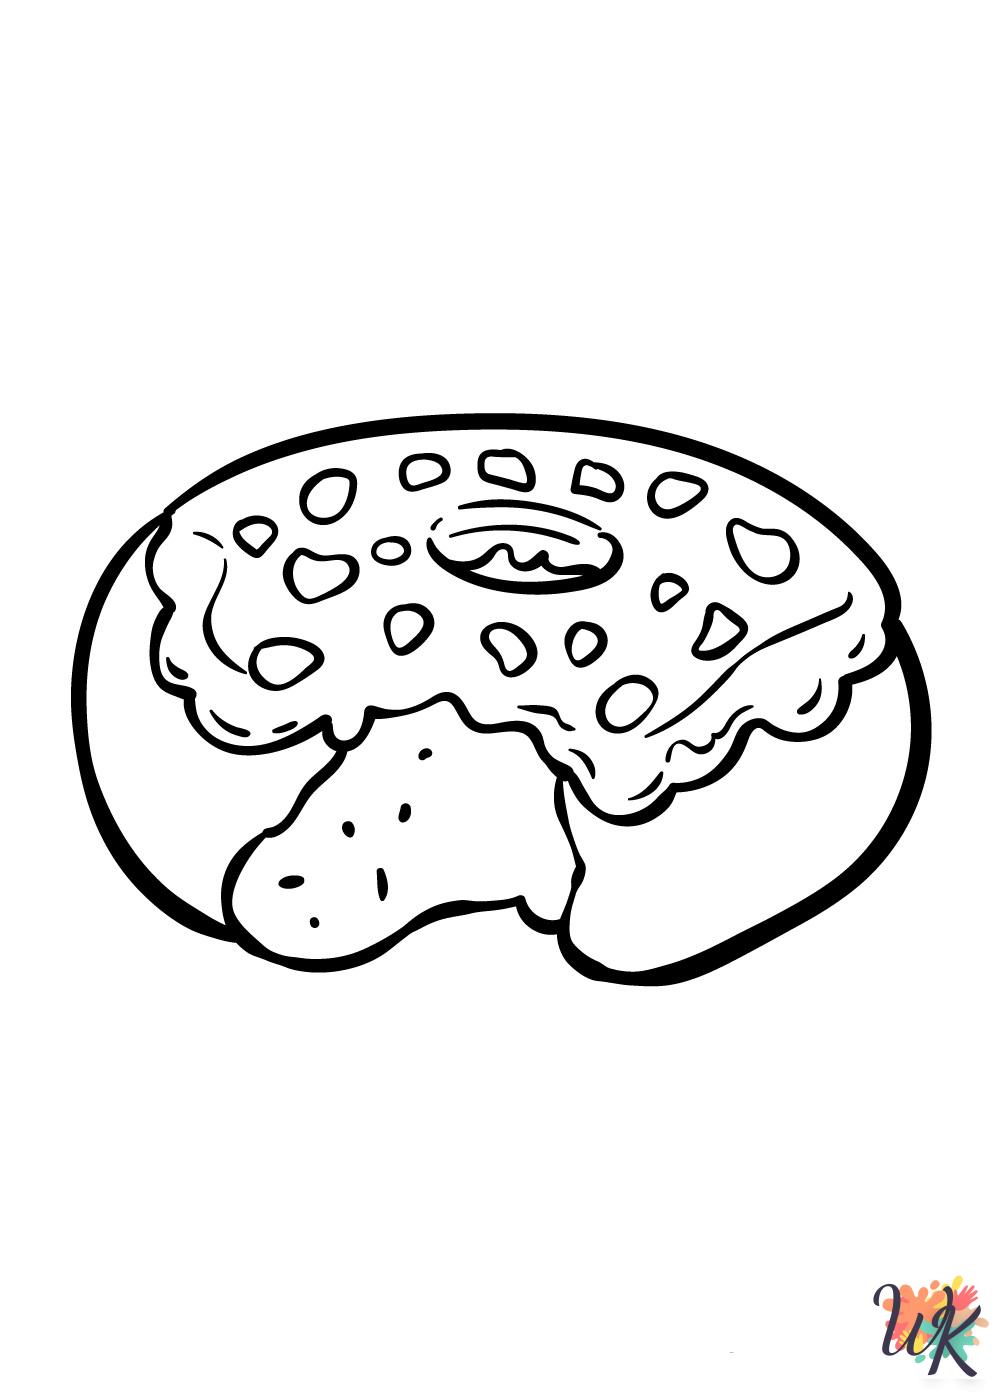 Donut coloring pages to print